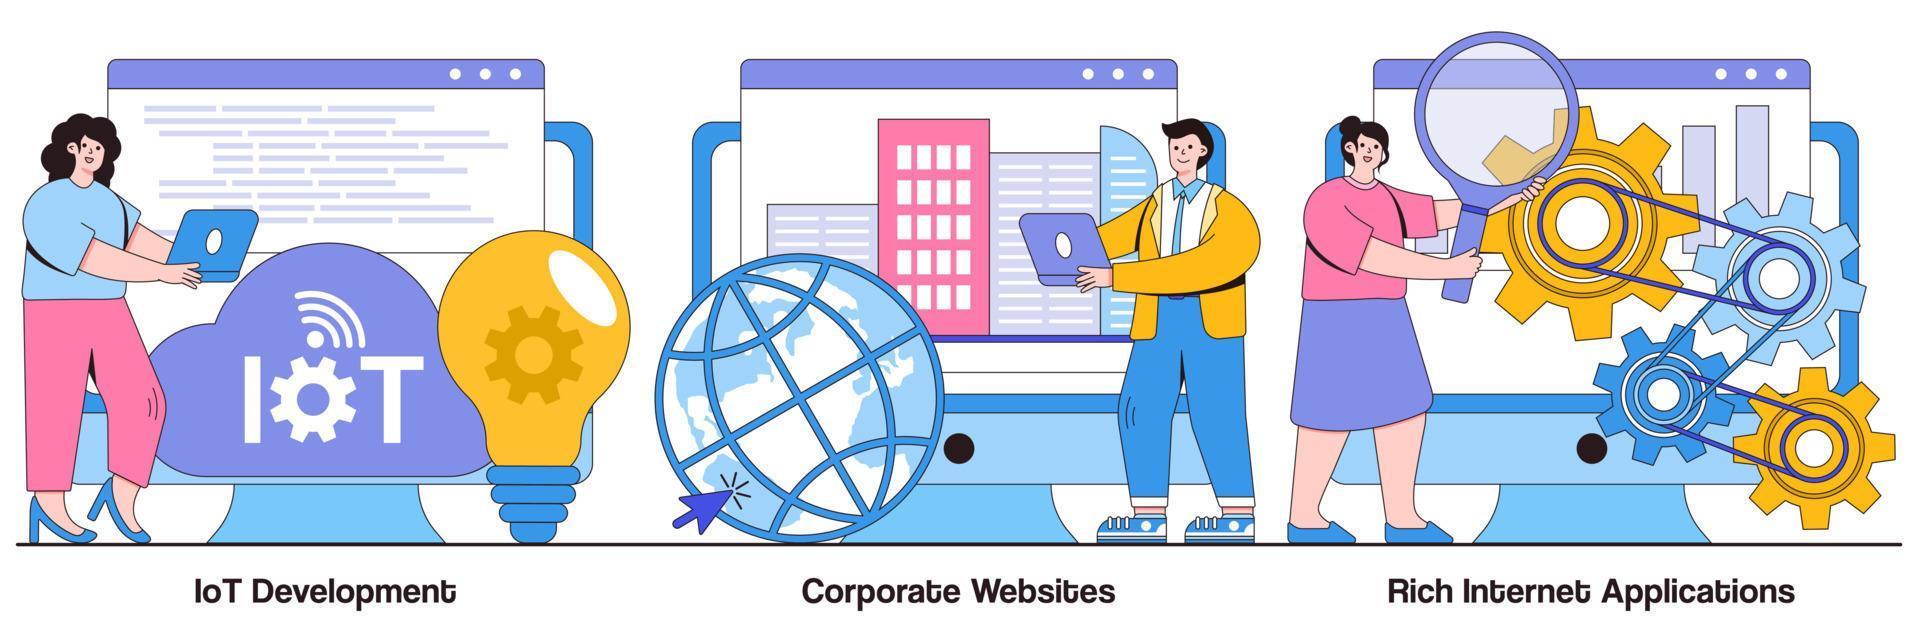 IoT Development, Corporate Website, and Rich Internet Applications Illustrated Pack vector